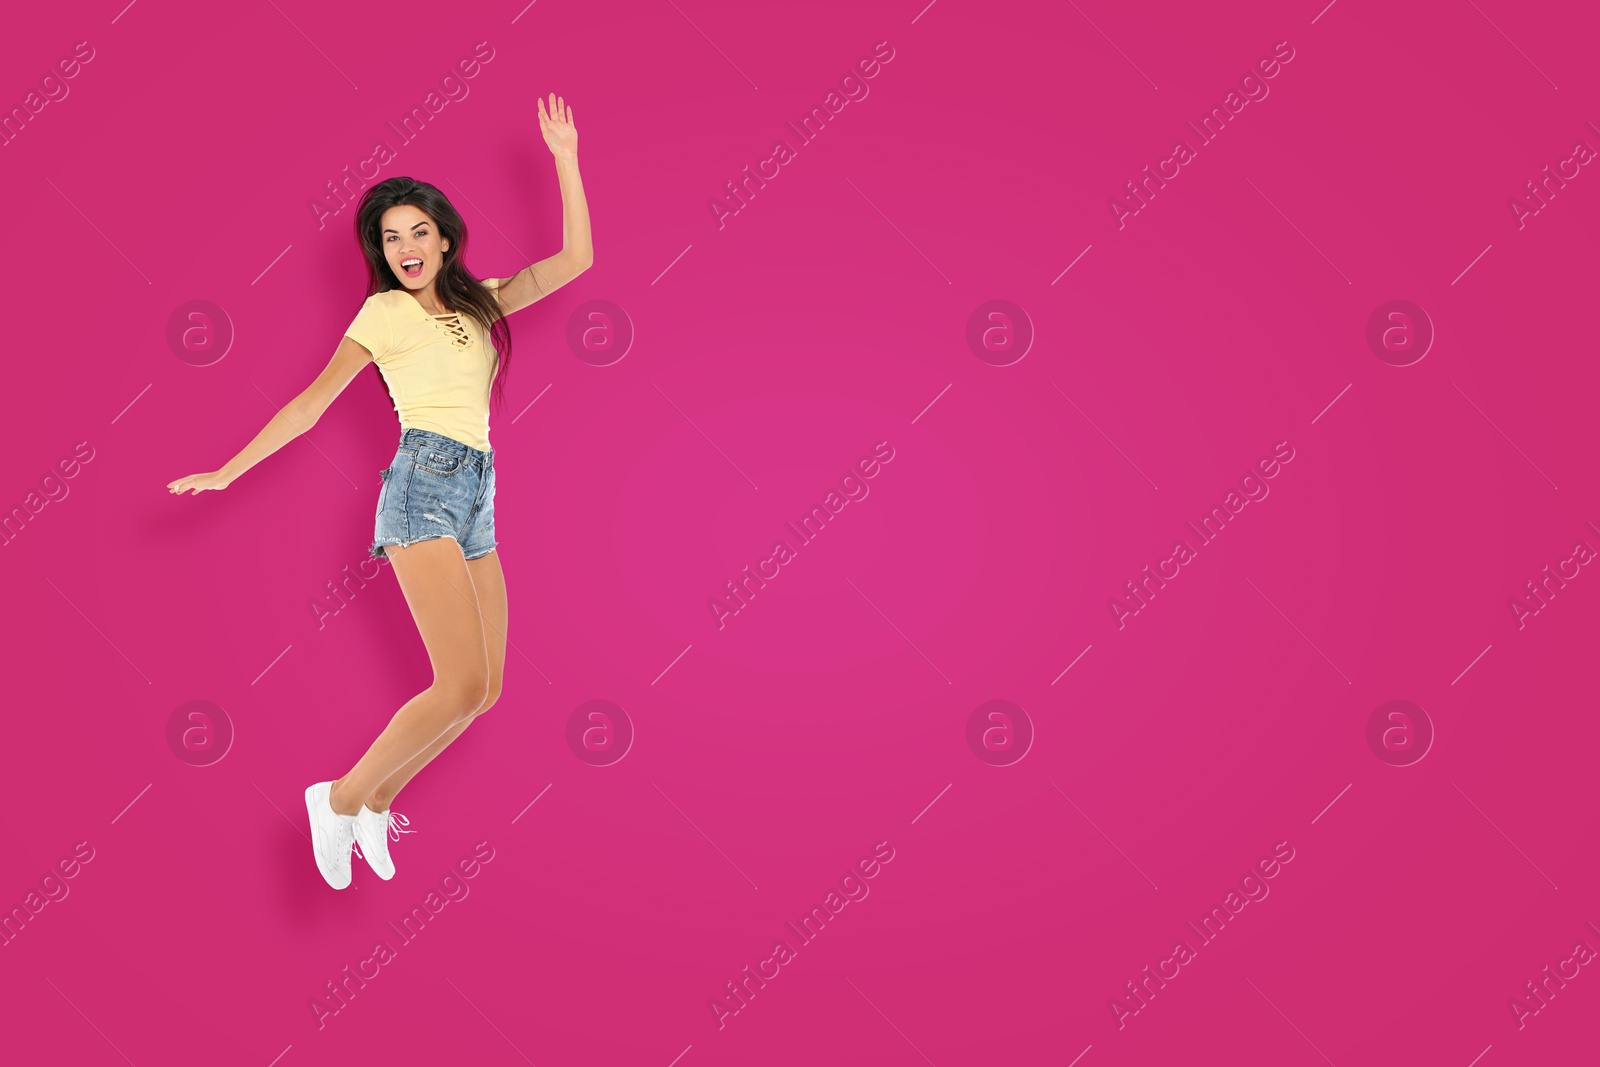 Image of Positive young woman jumping on hot pink background. Space for text